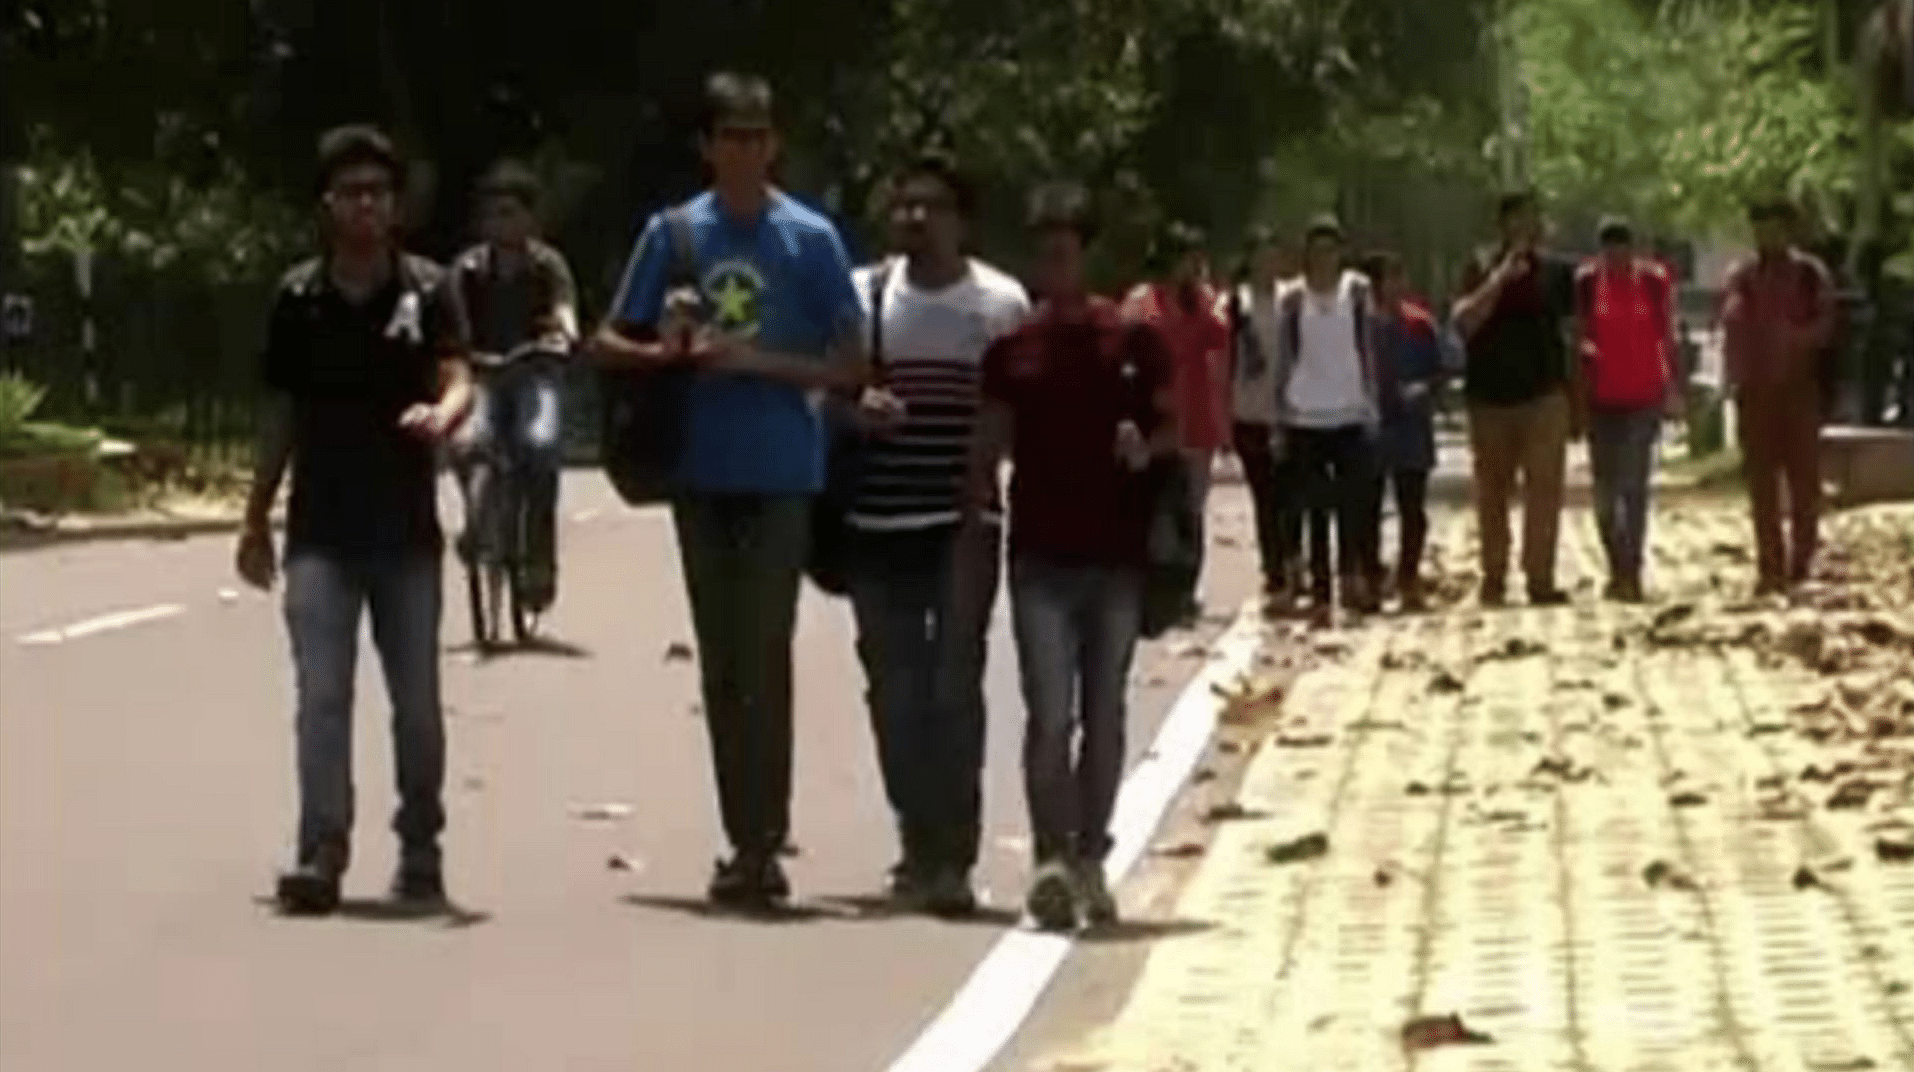 Students at IIT Roorkee (Photo: Youtube.com)